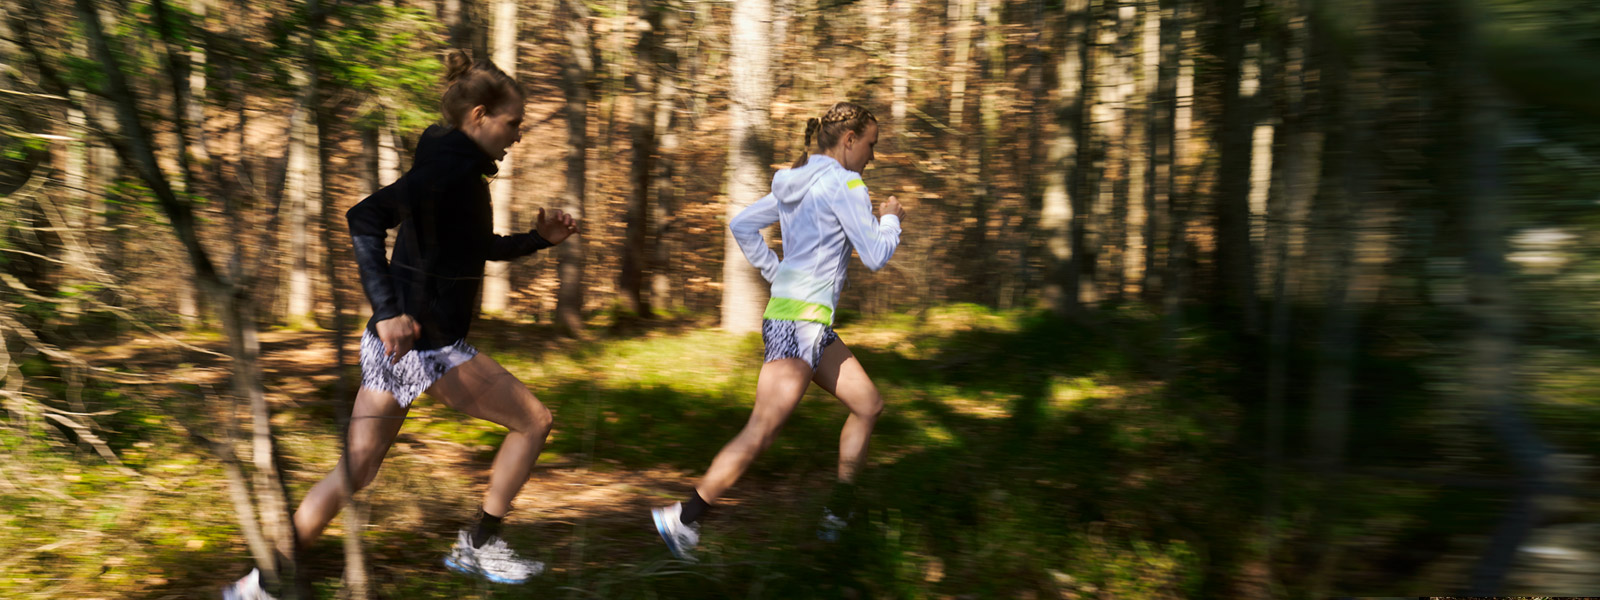 Two runners quickly run through the undergrowth with a slight image blur